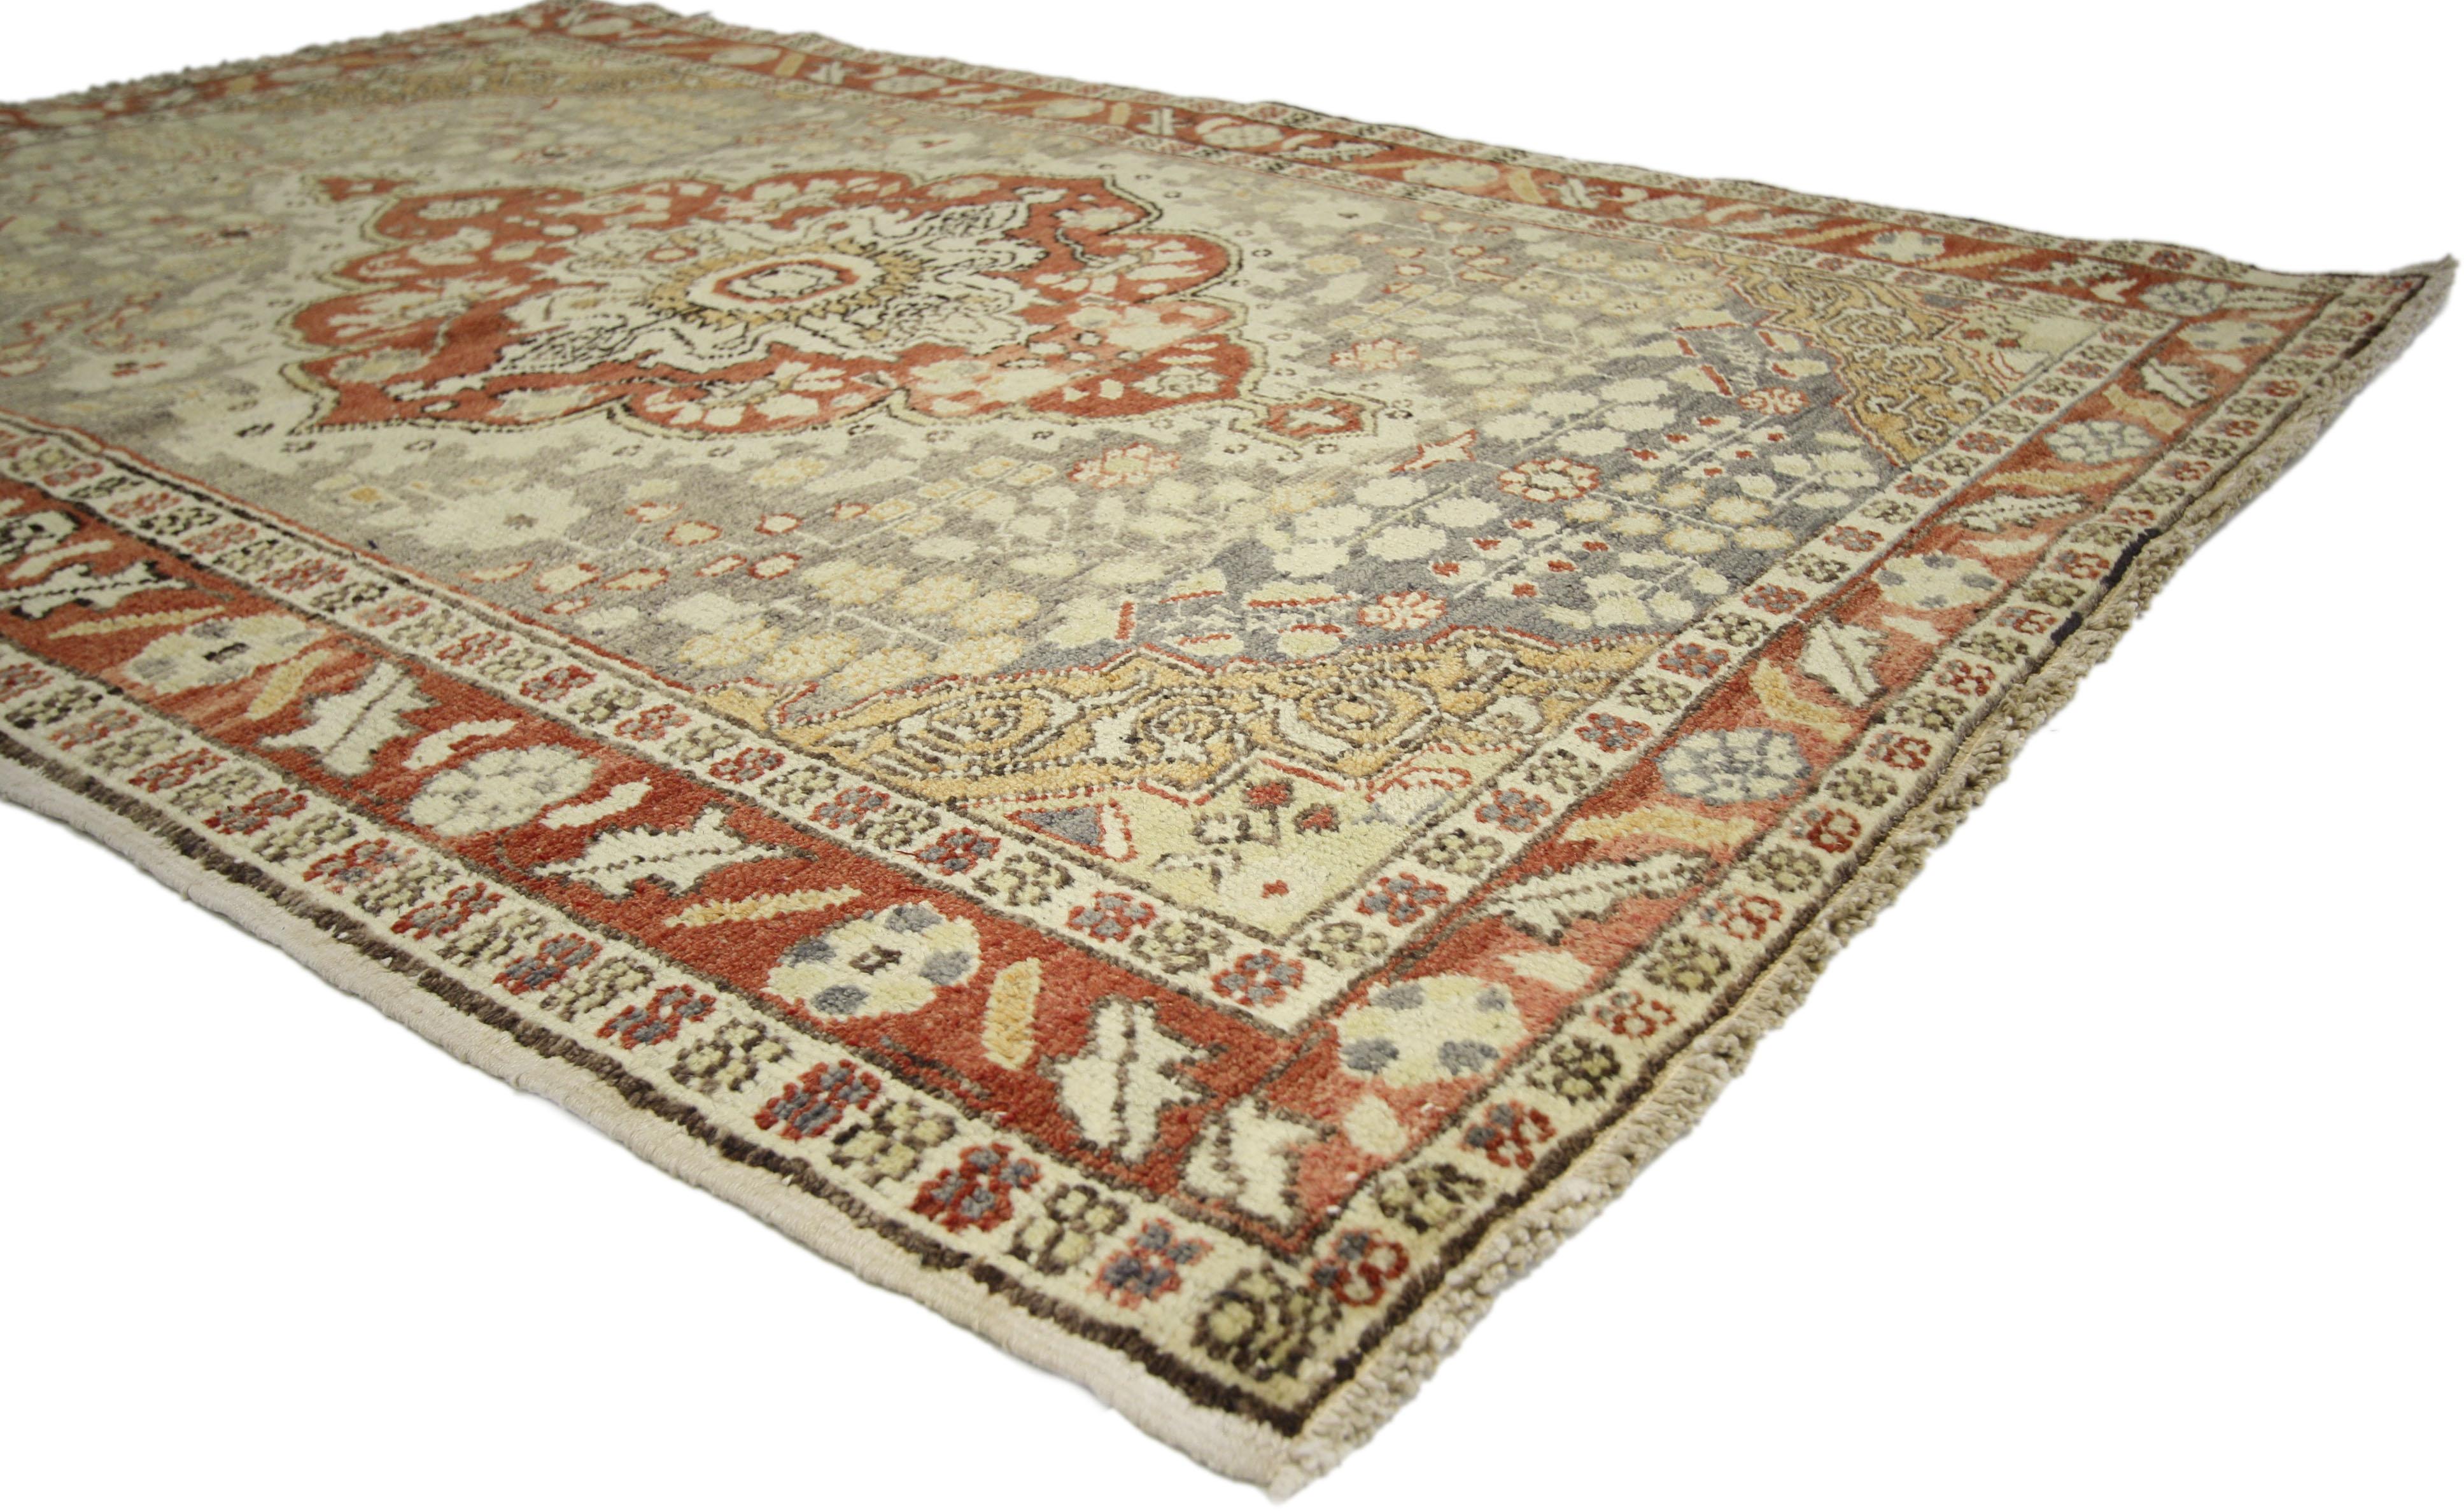 Modern Rustic Style Vintage Turkish Sivas Accent Rug, Entry or Foyer Rug In Distressed Condition For Sale In Dallas, TX